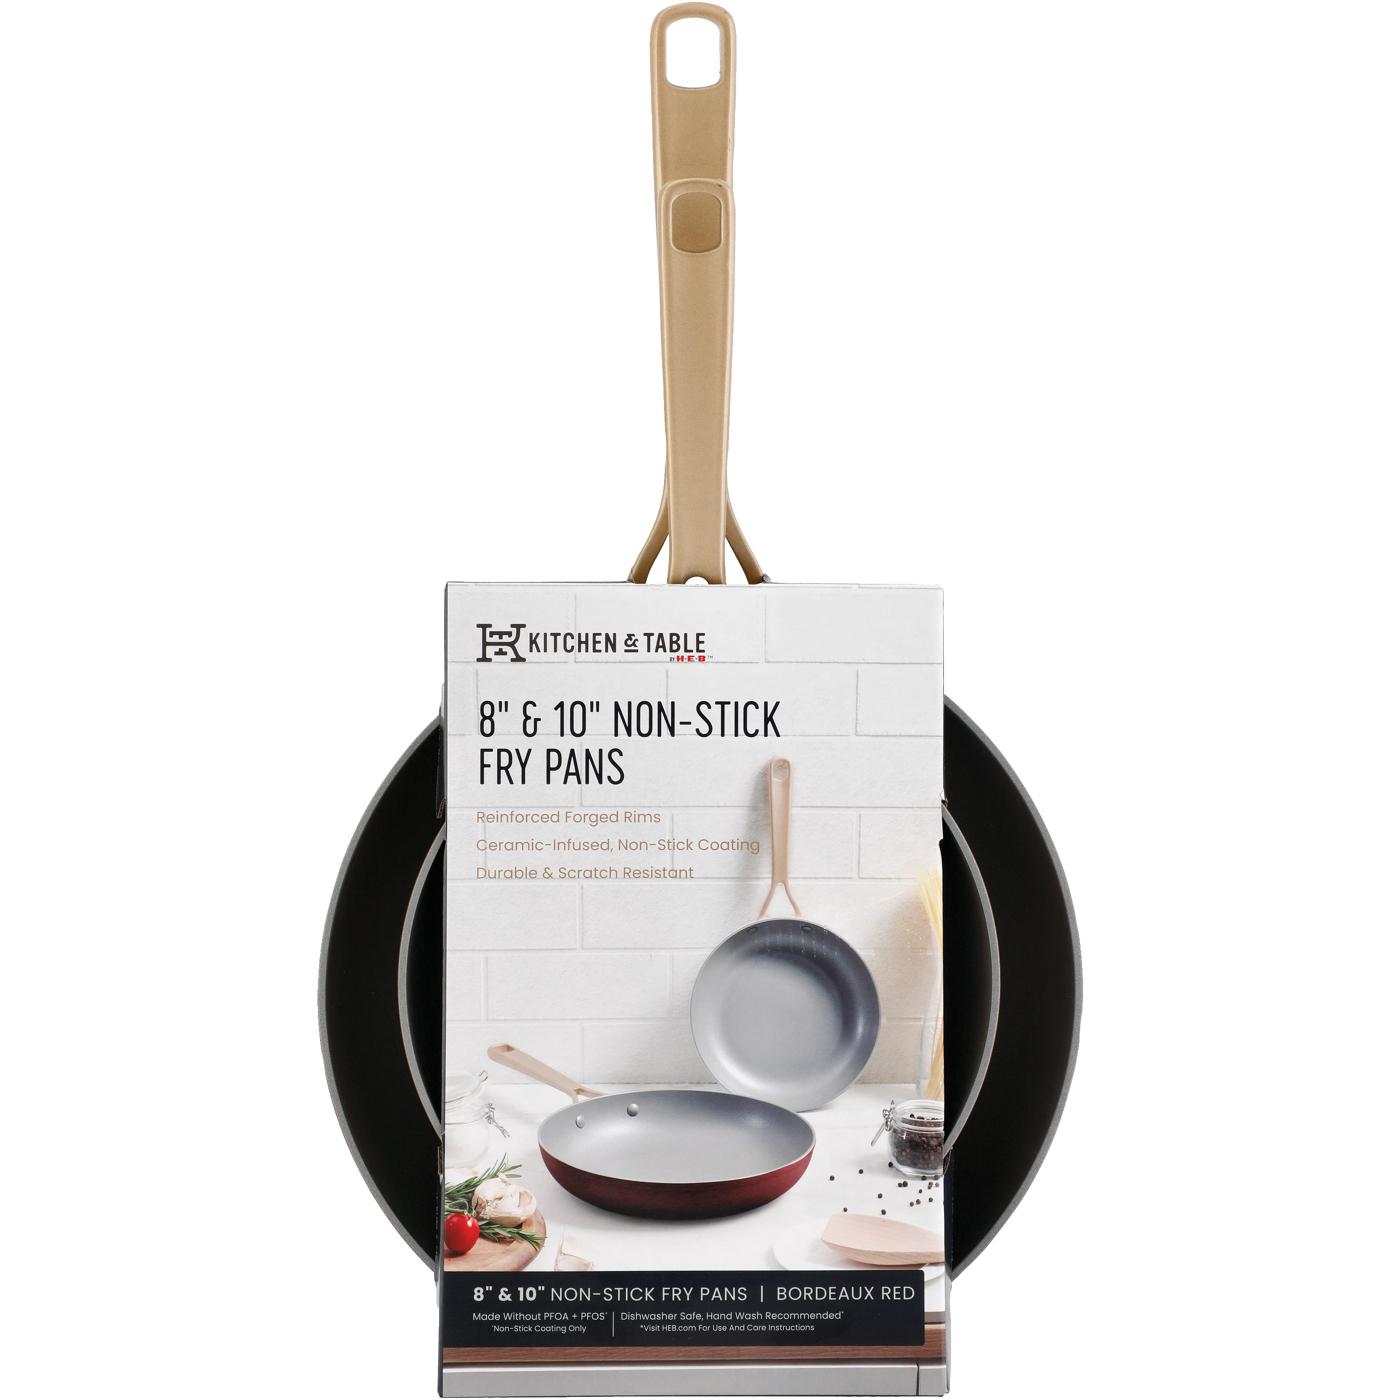 Kitchen & Table by H-E-B Non-Stick Fry Pans - Bordeaux Red; image 3 of 3